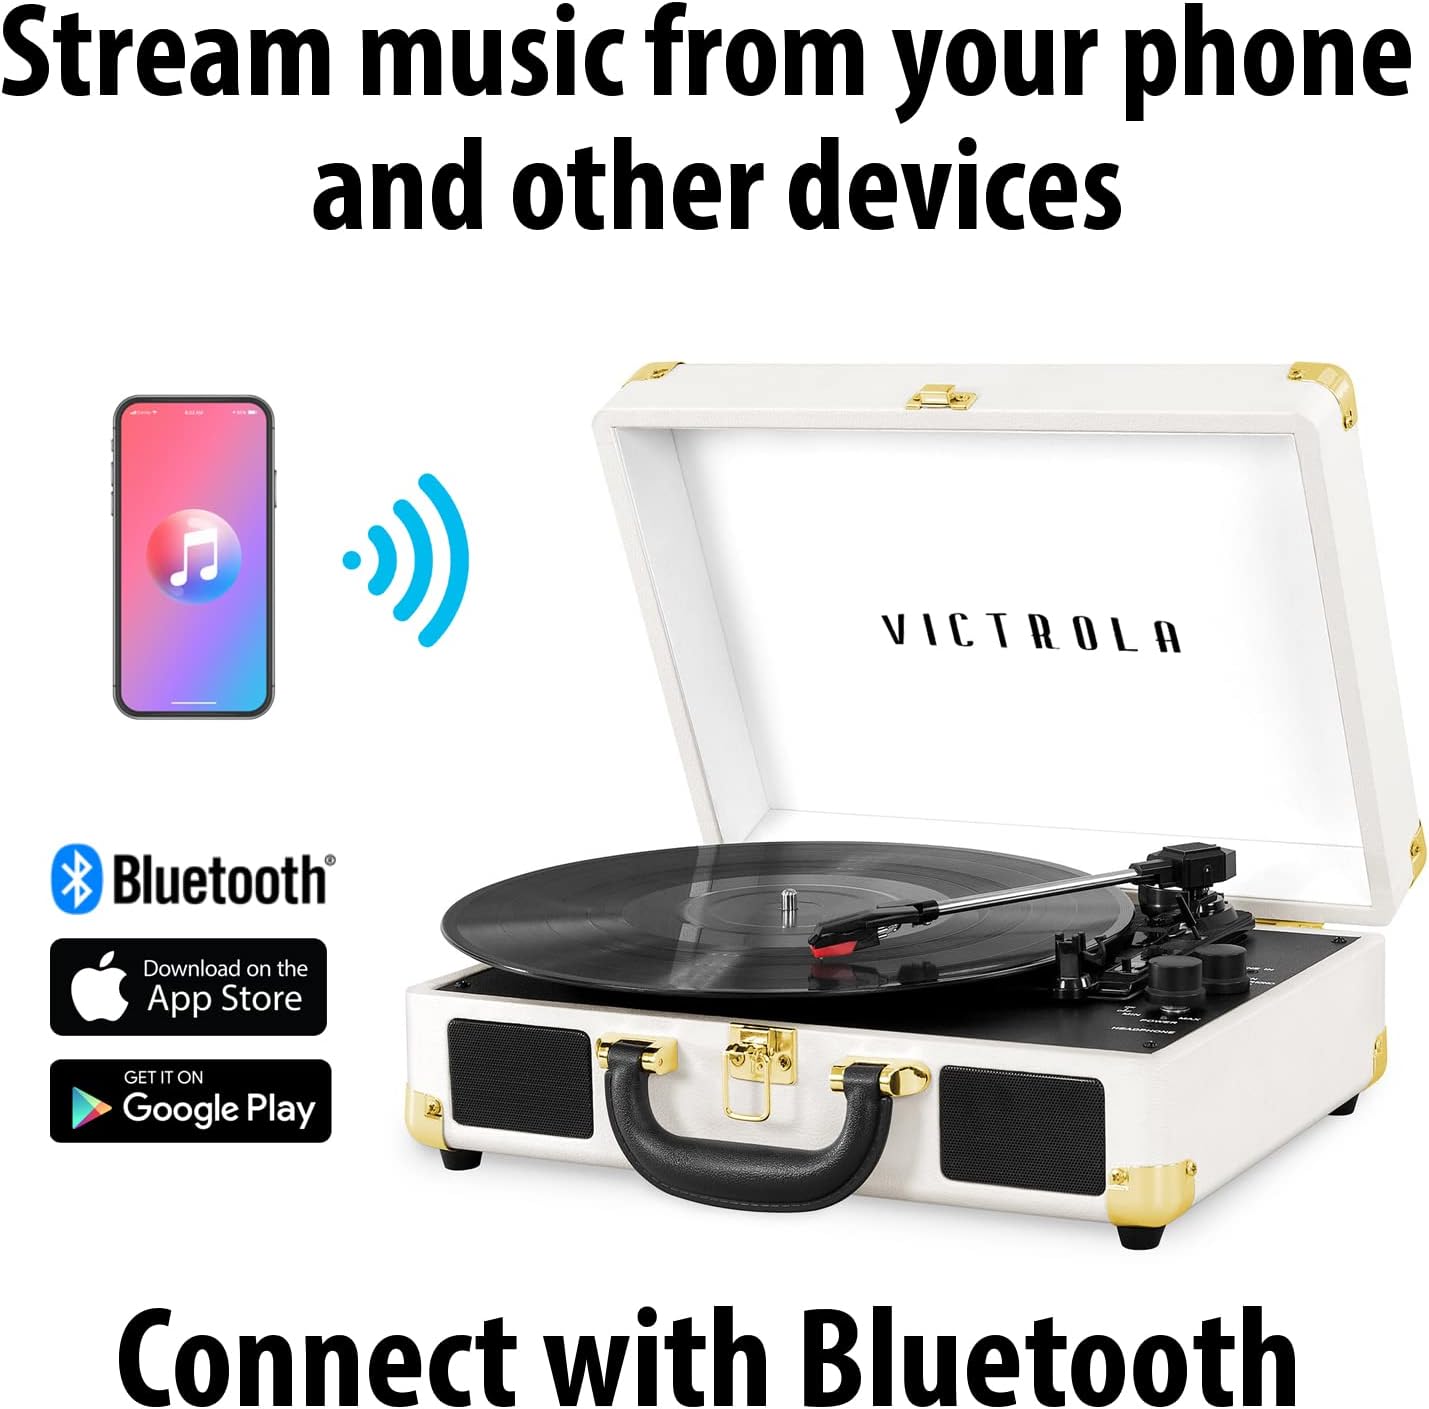 Victrola Vintage 3-Speed Bluetooth Portable Suitcase Report Player with Built-in Speakers | Upgraded Turntable Audio Sound| Includes Extra Stylus | Turquoise, Prototype Number: VSC-550BT